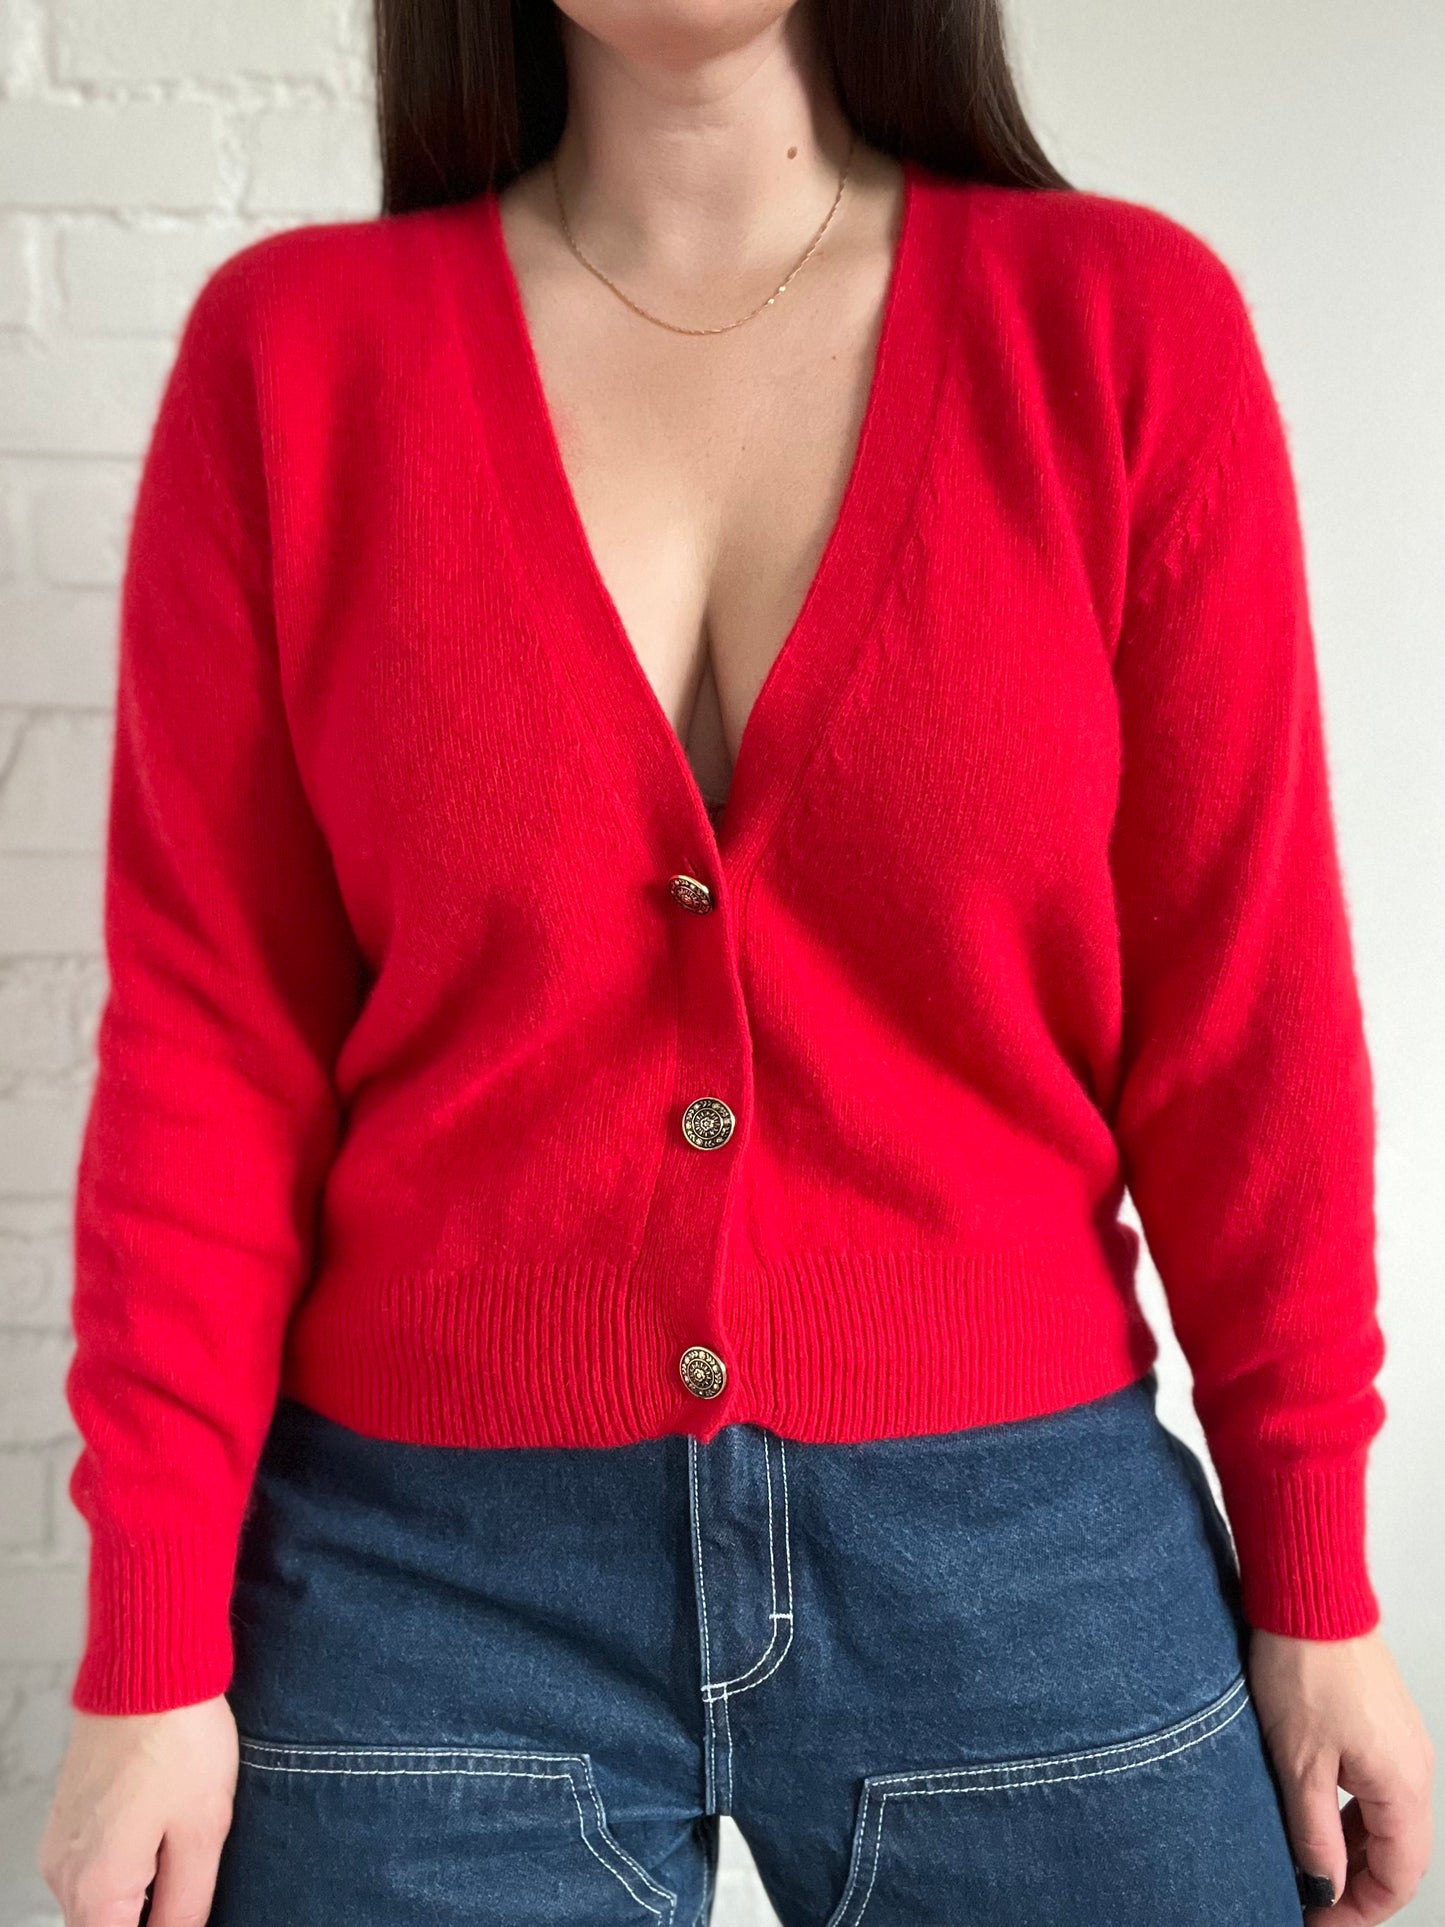 Cashmere Red & Gold Cardigan  - S